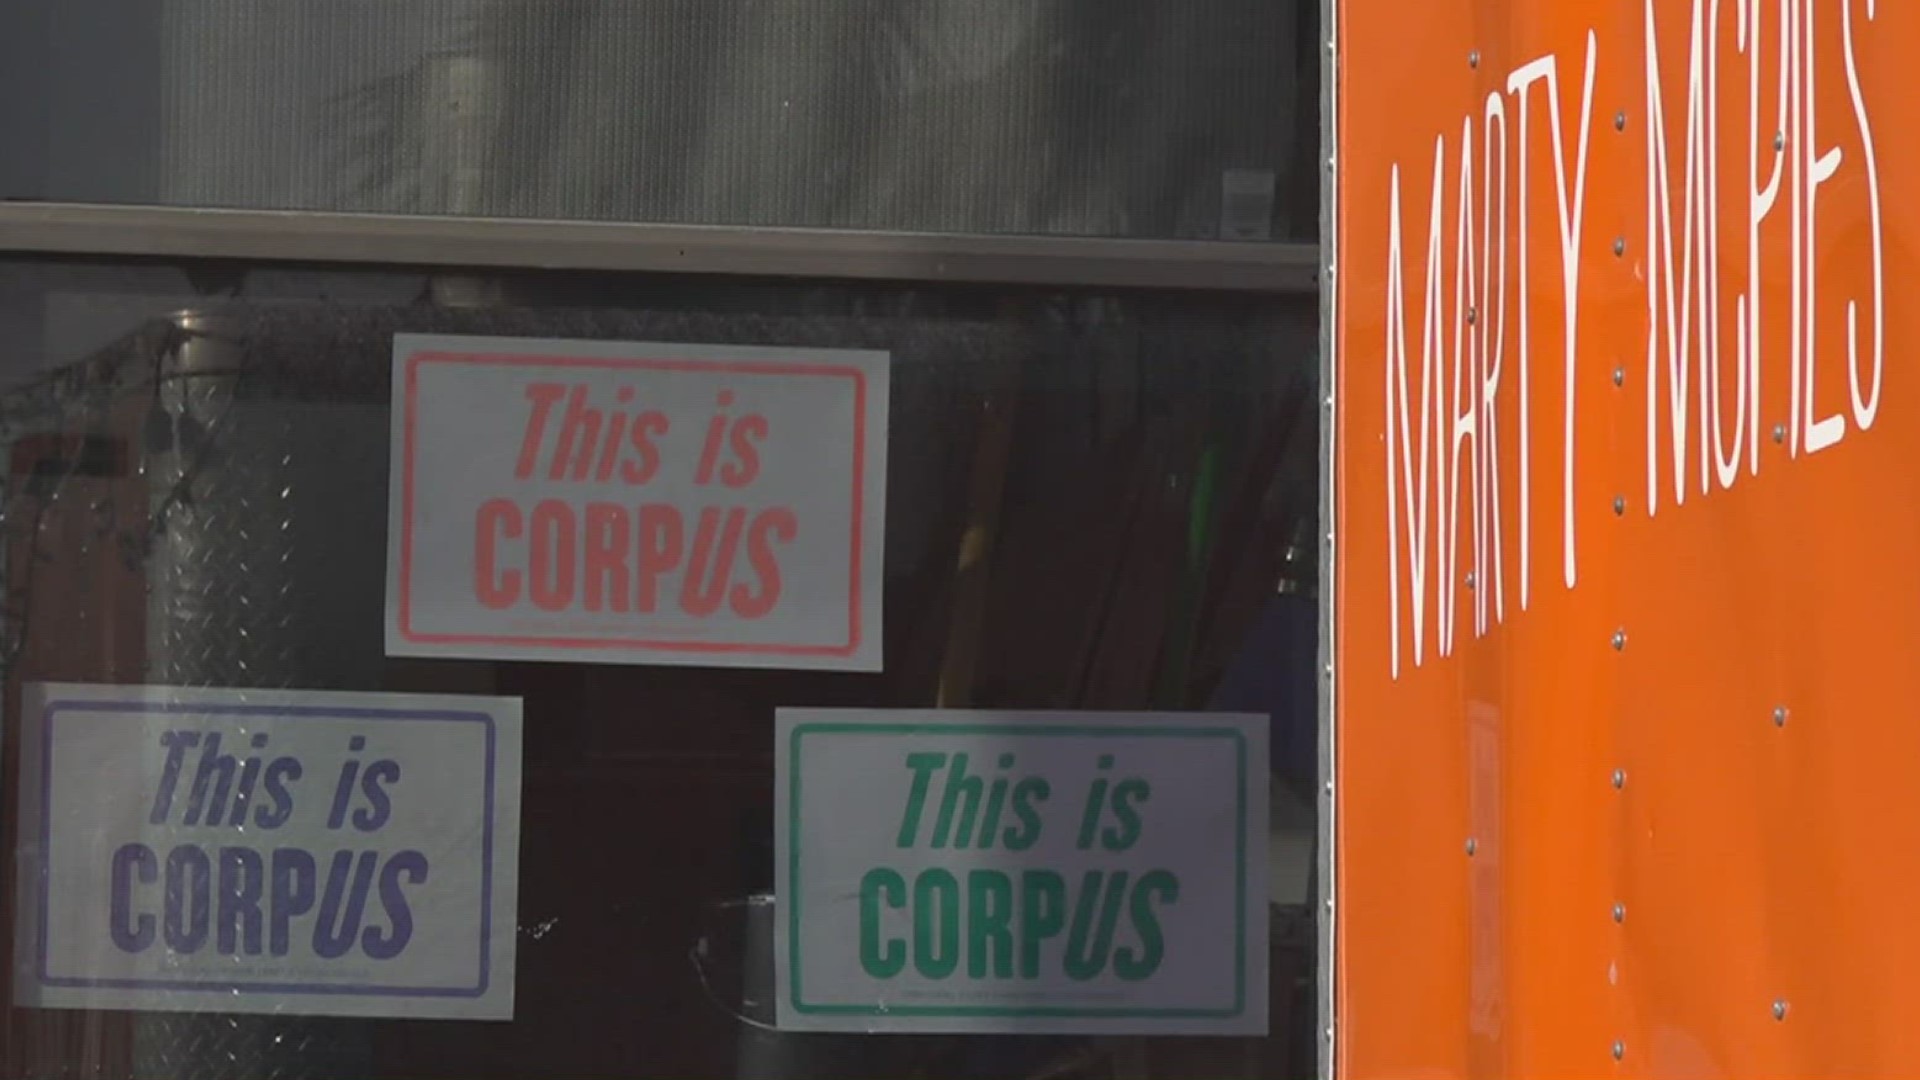 Justin Gainan is the co-owner of Lucy's Snackbar and creator of the "This is Corpus" signs.